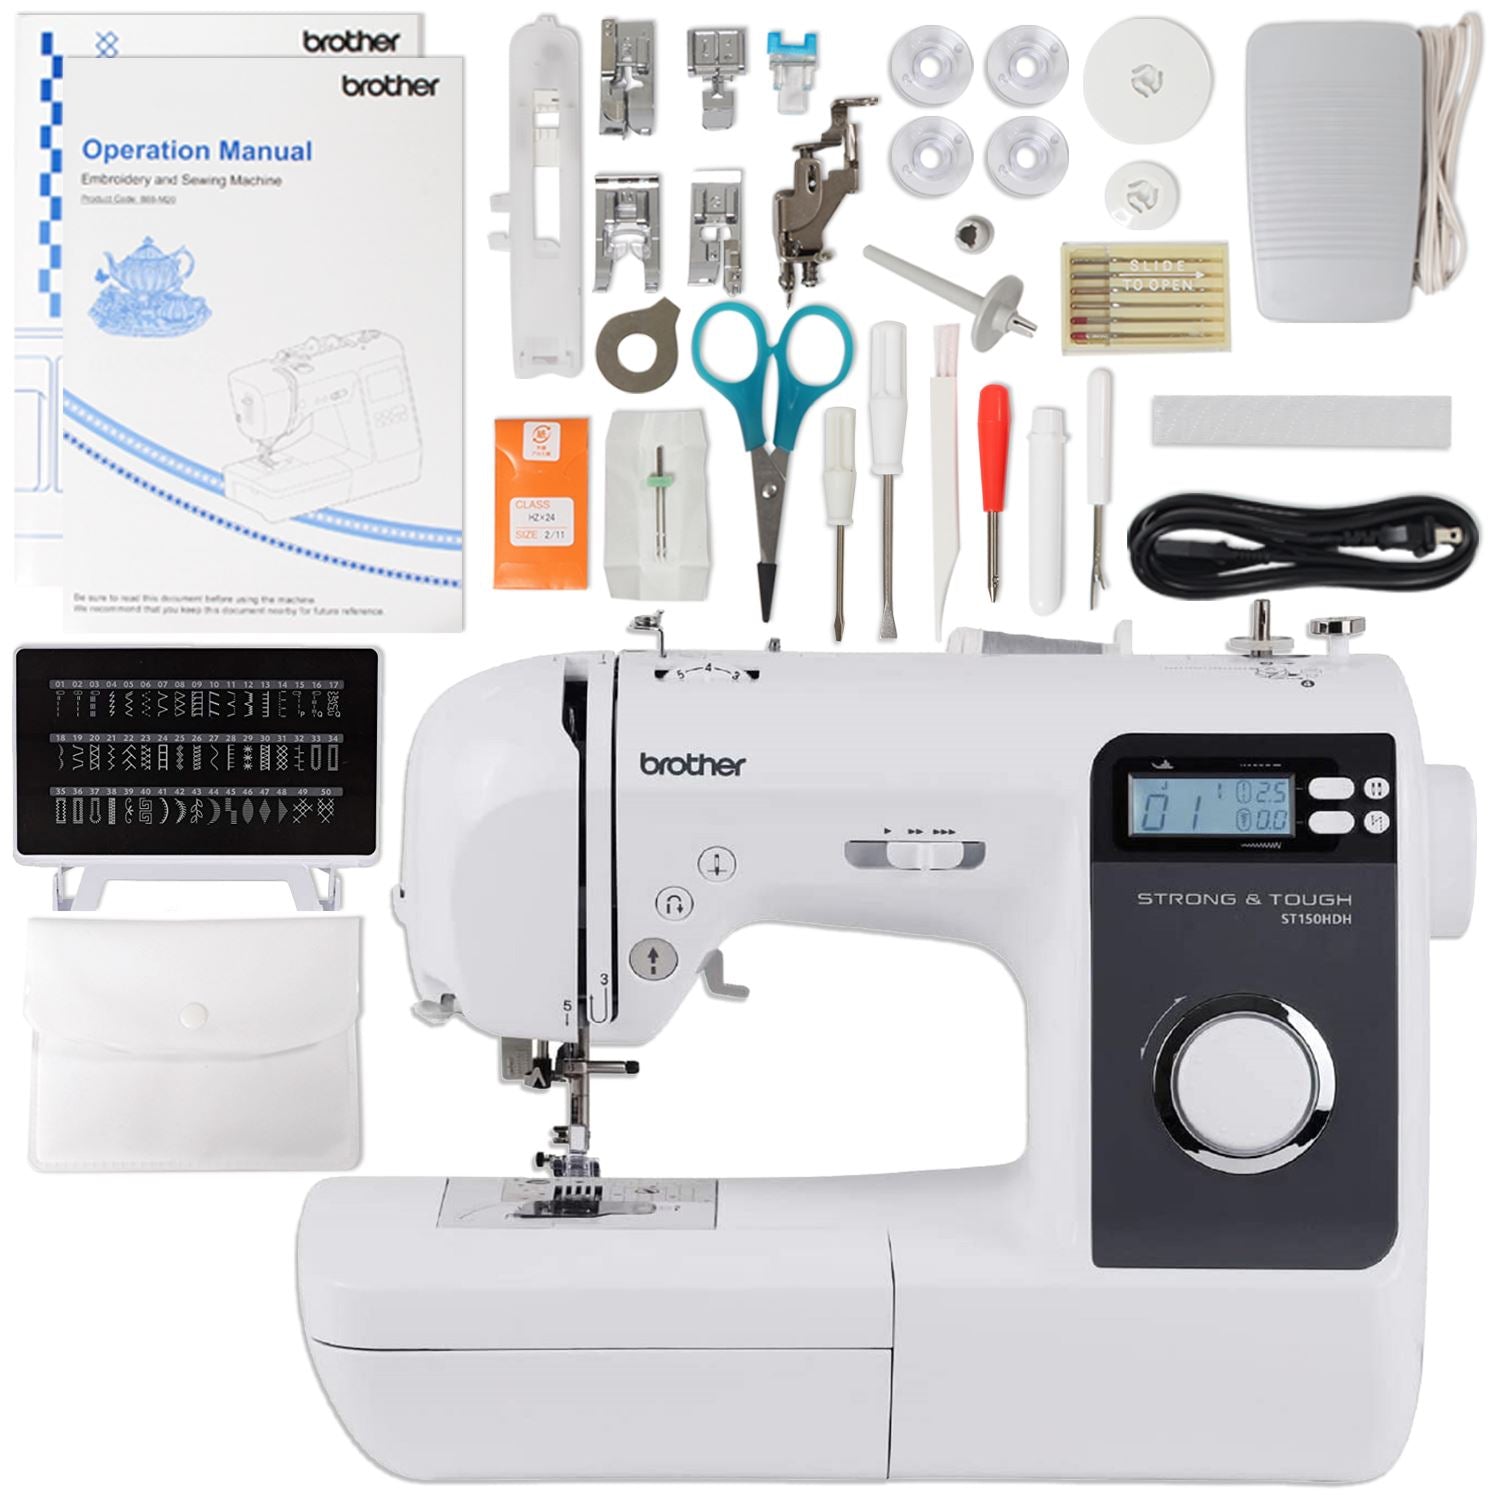 Brother ST150HDH Sewing Machine, Strong & Tough, 50 Built-In Stitches, LCD Displ